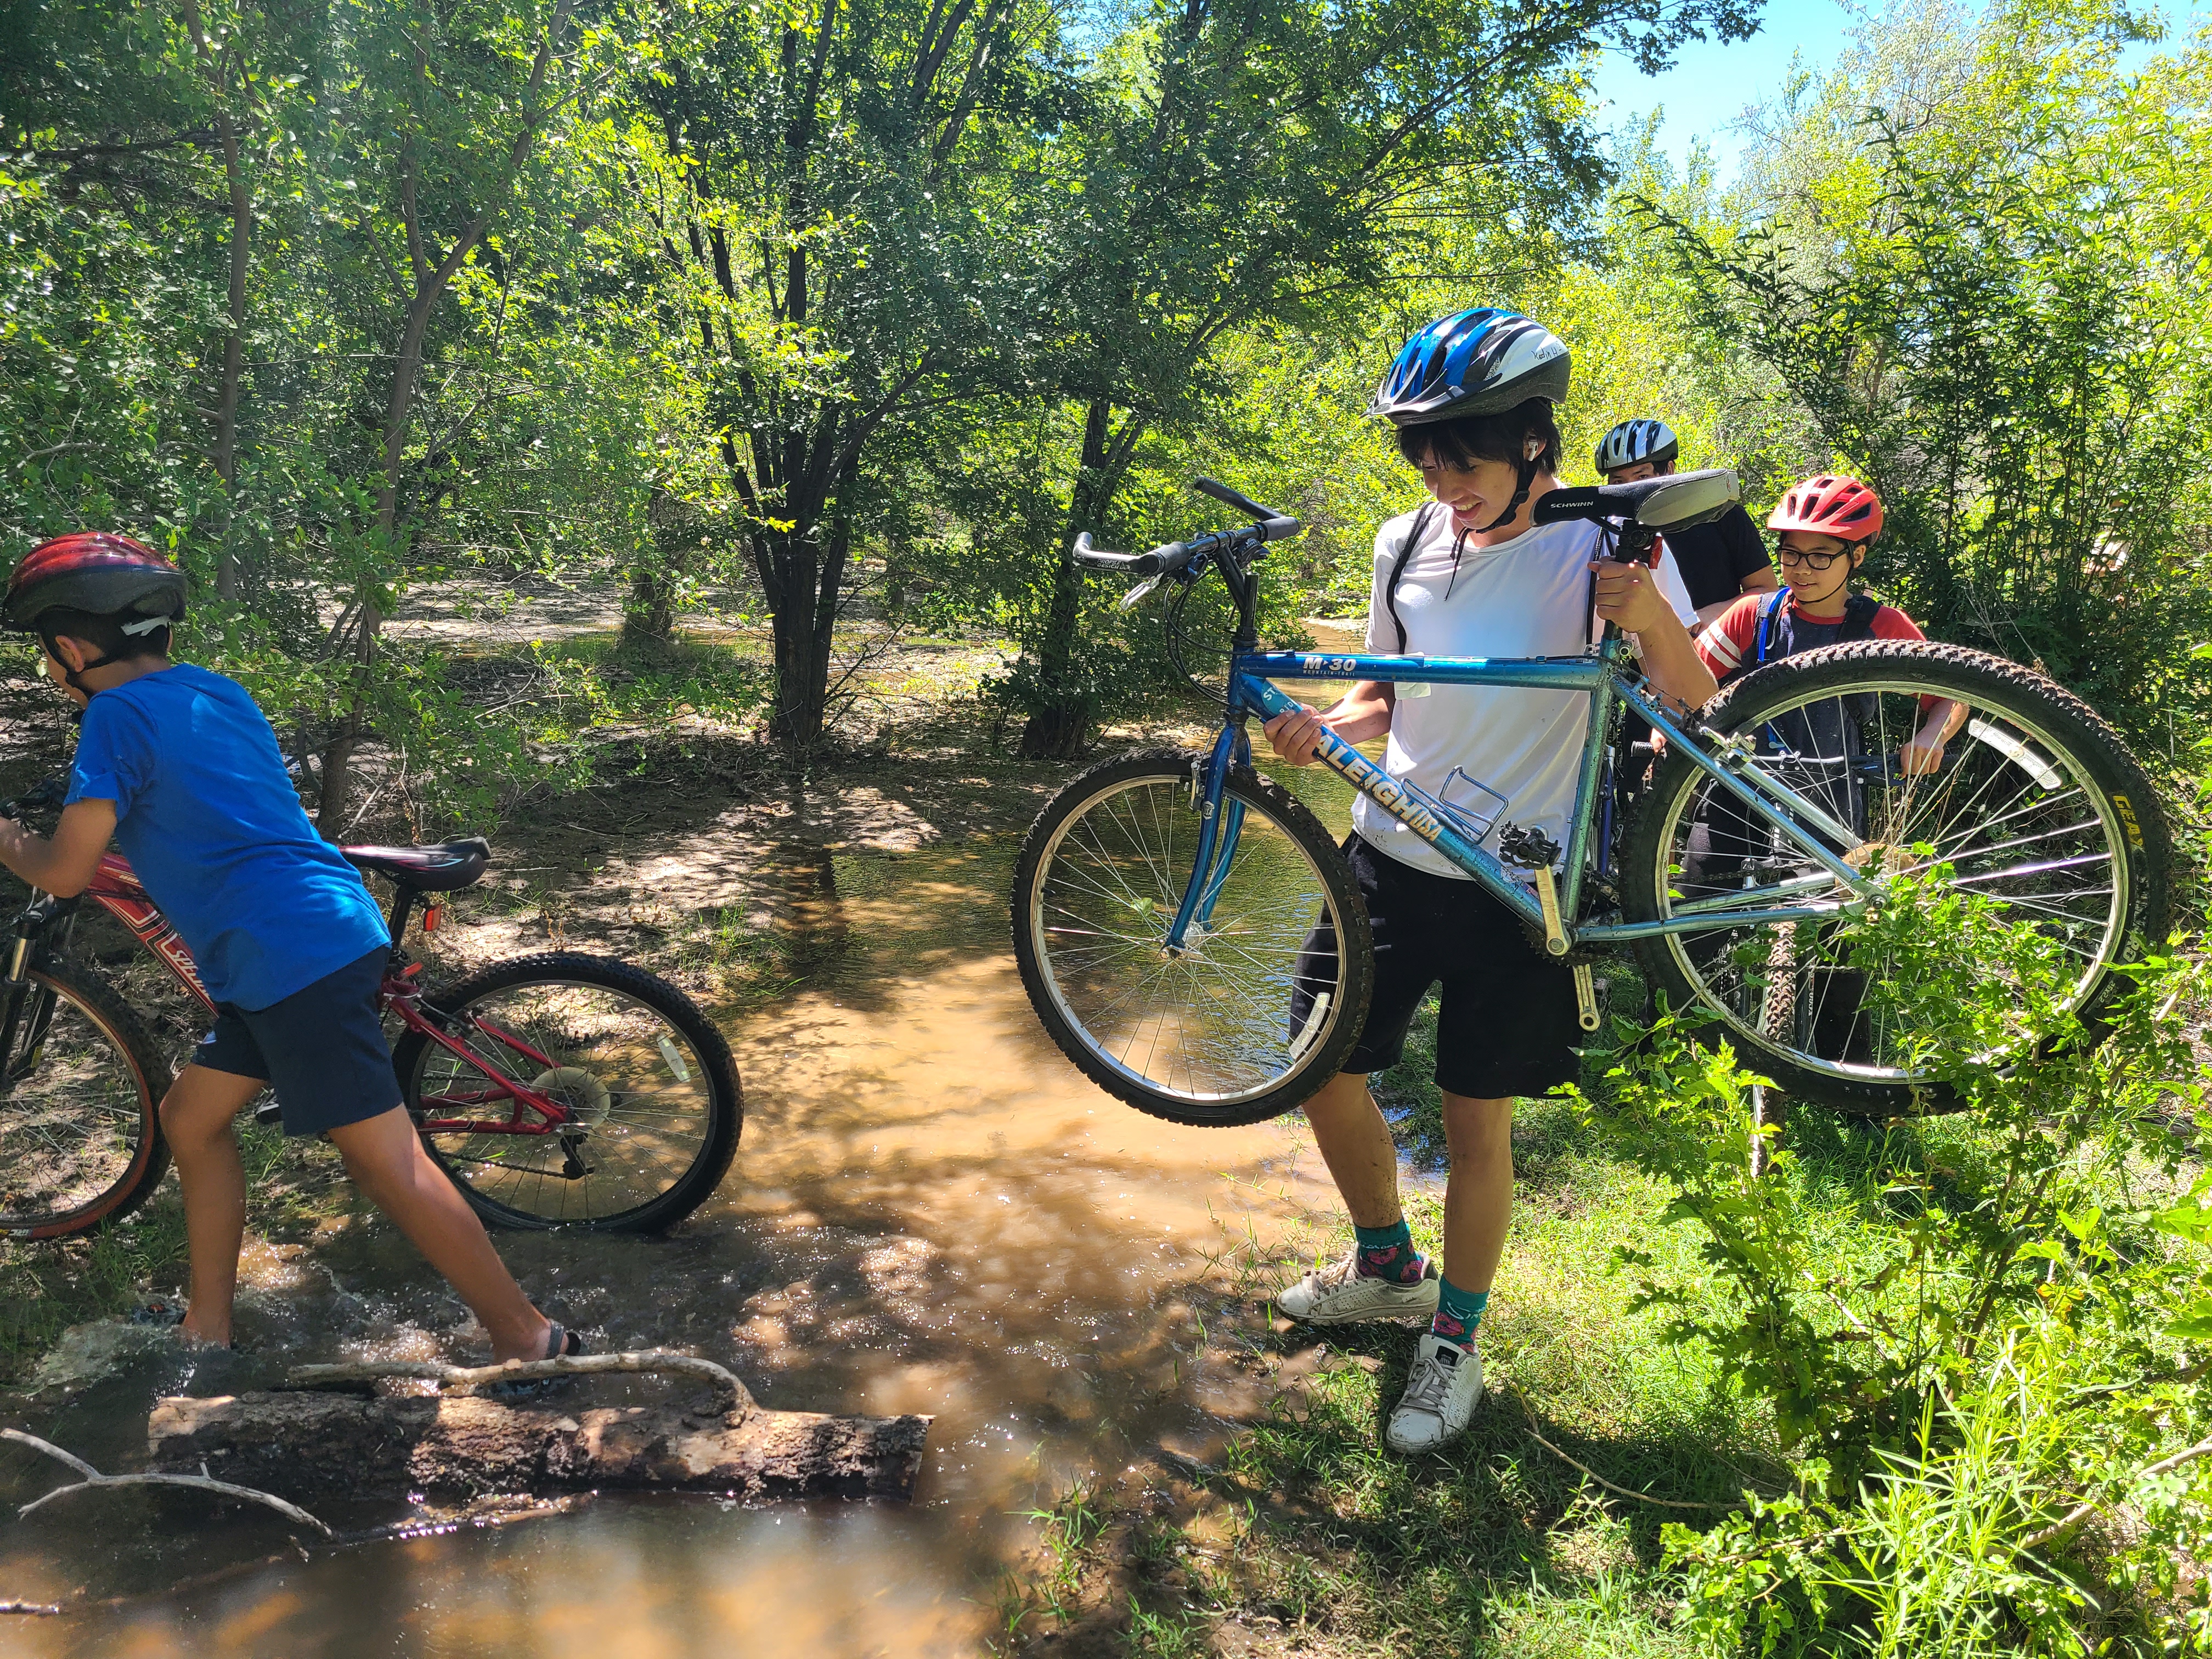 Two young people cross a creek while holding bikes